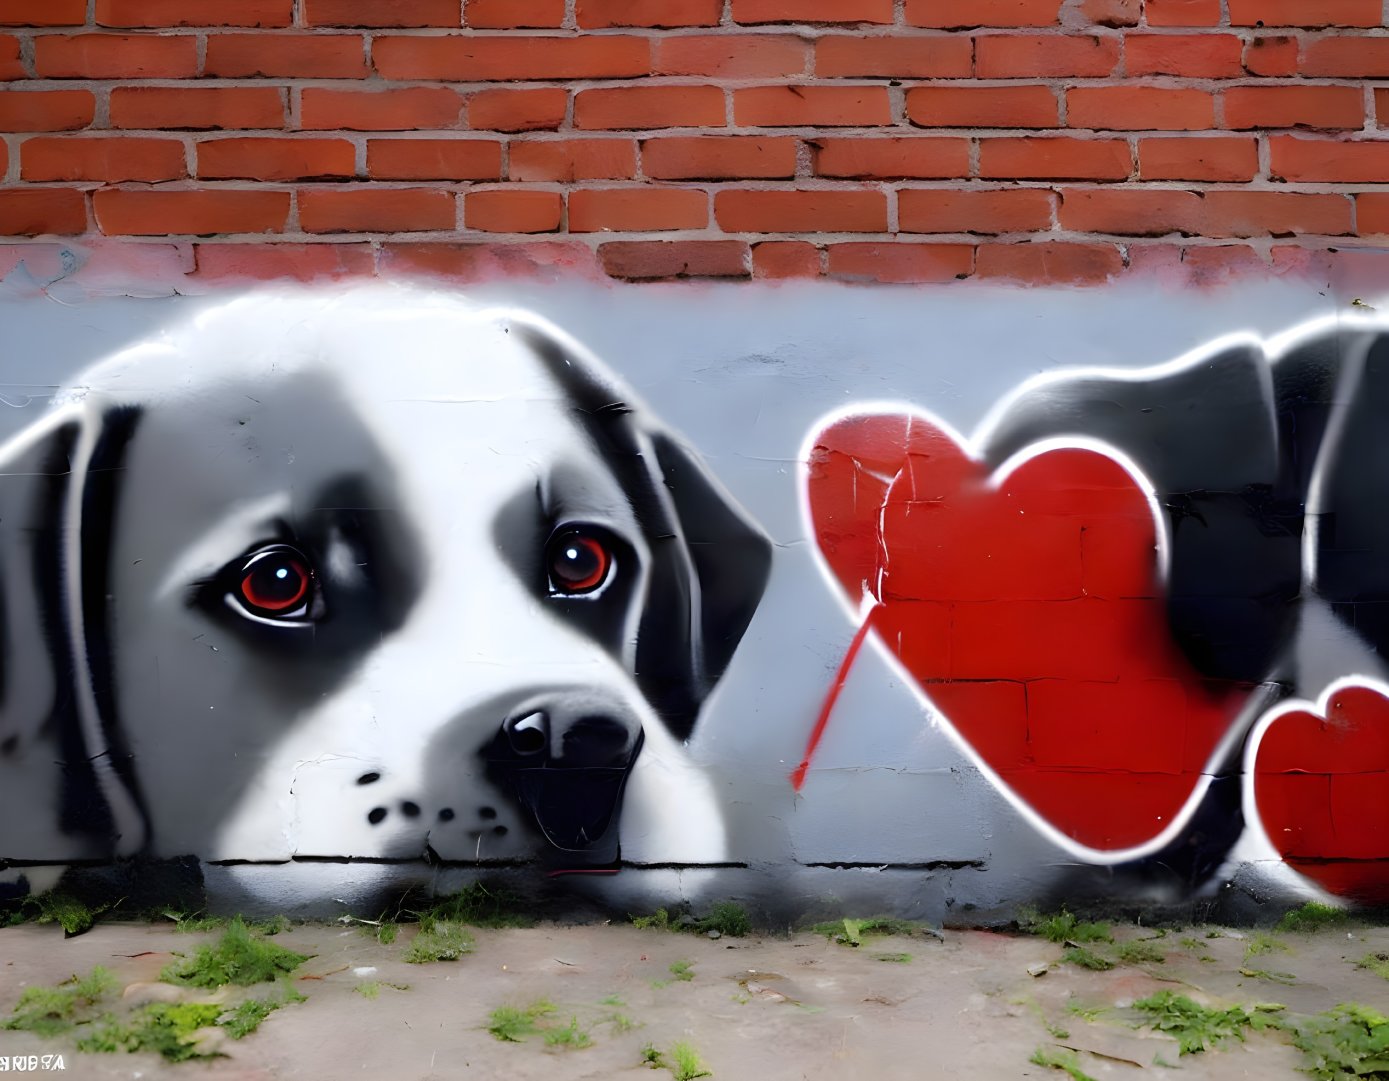 Vibrant graffiti mural featuring dog's face and heart symbol hand